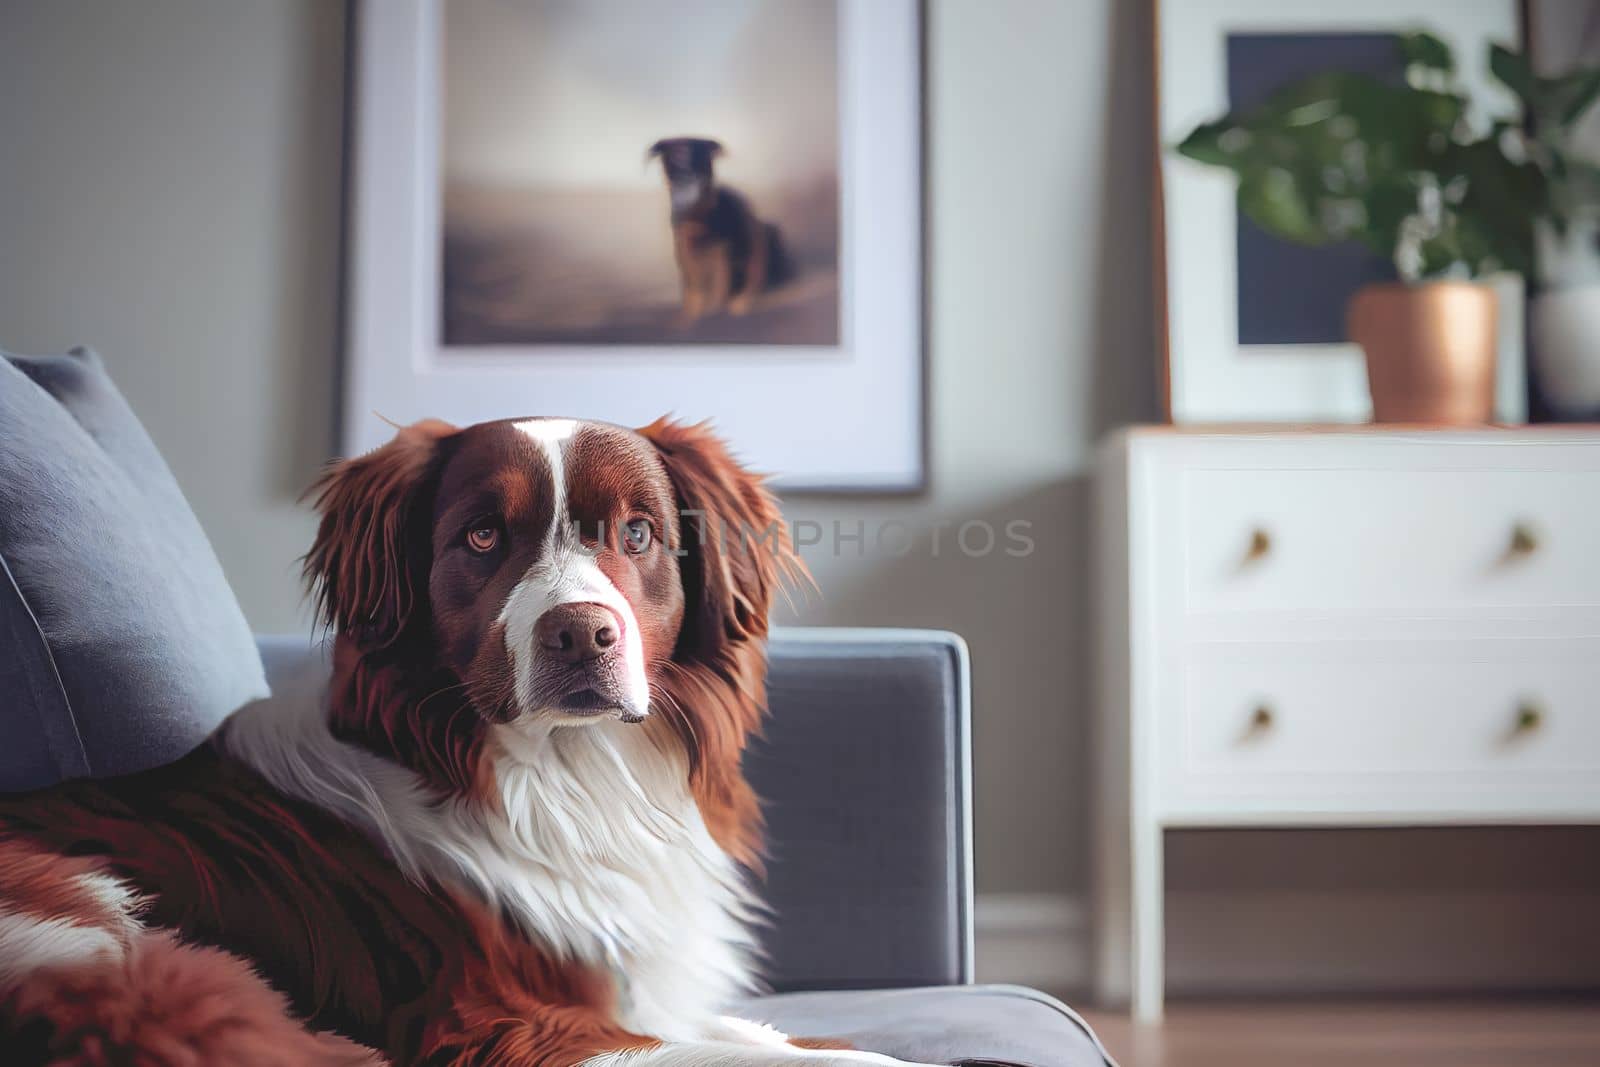 Close up of a friendly dog lounging in room with white furniture background, highlighting the pet playful nature and the modern minimalist decor.